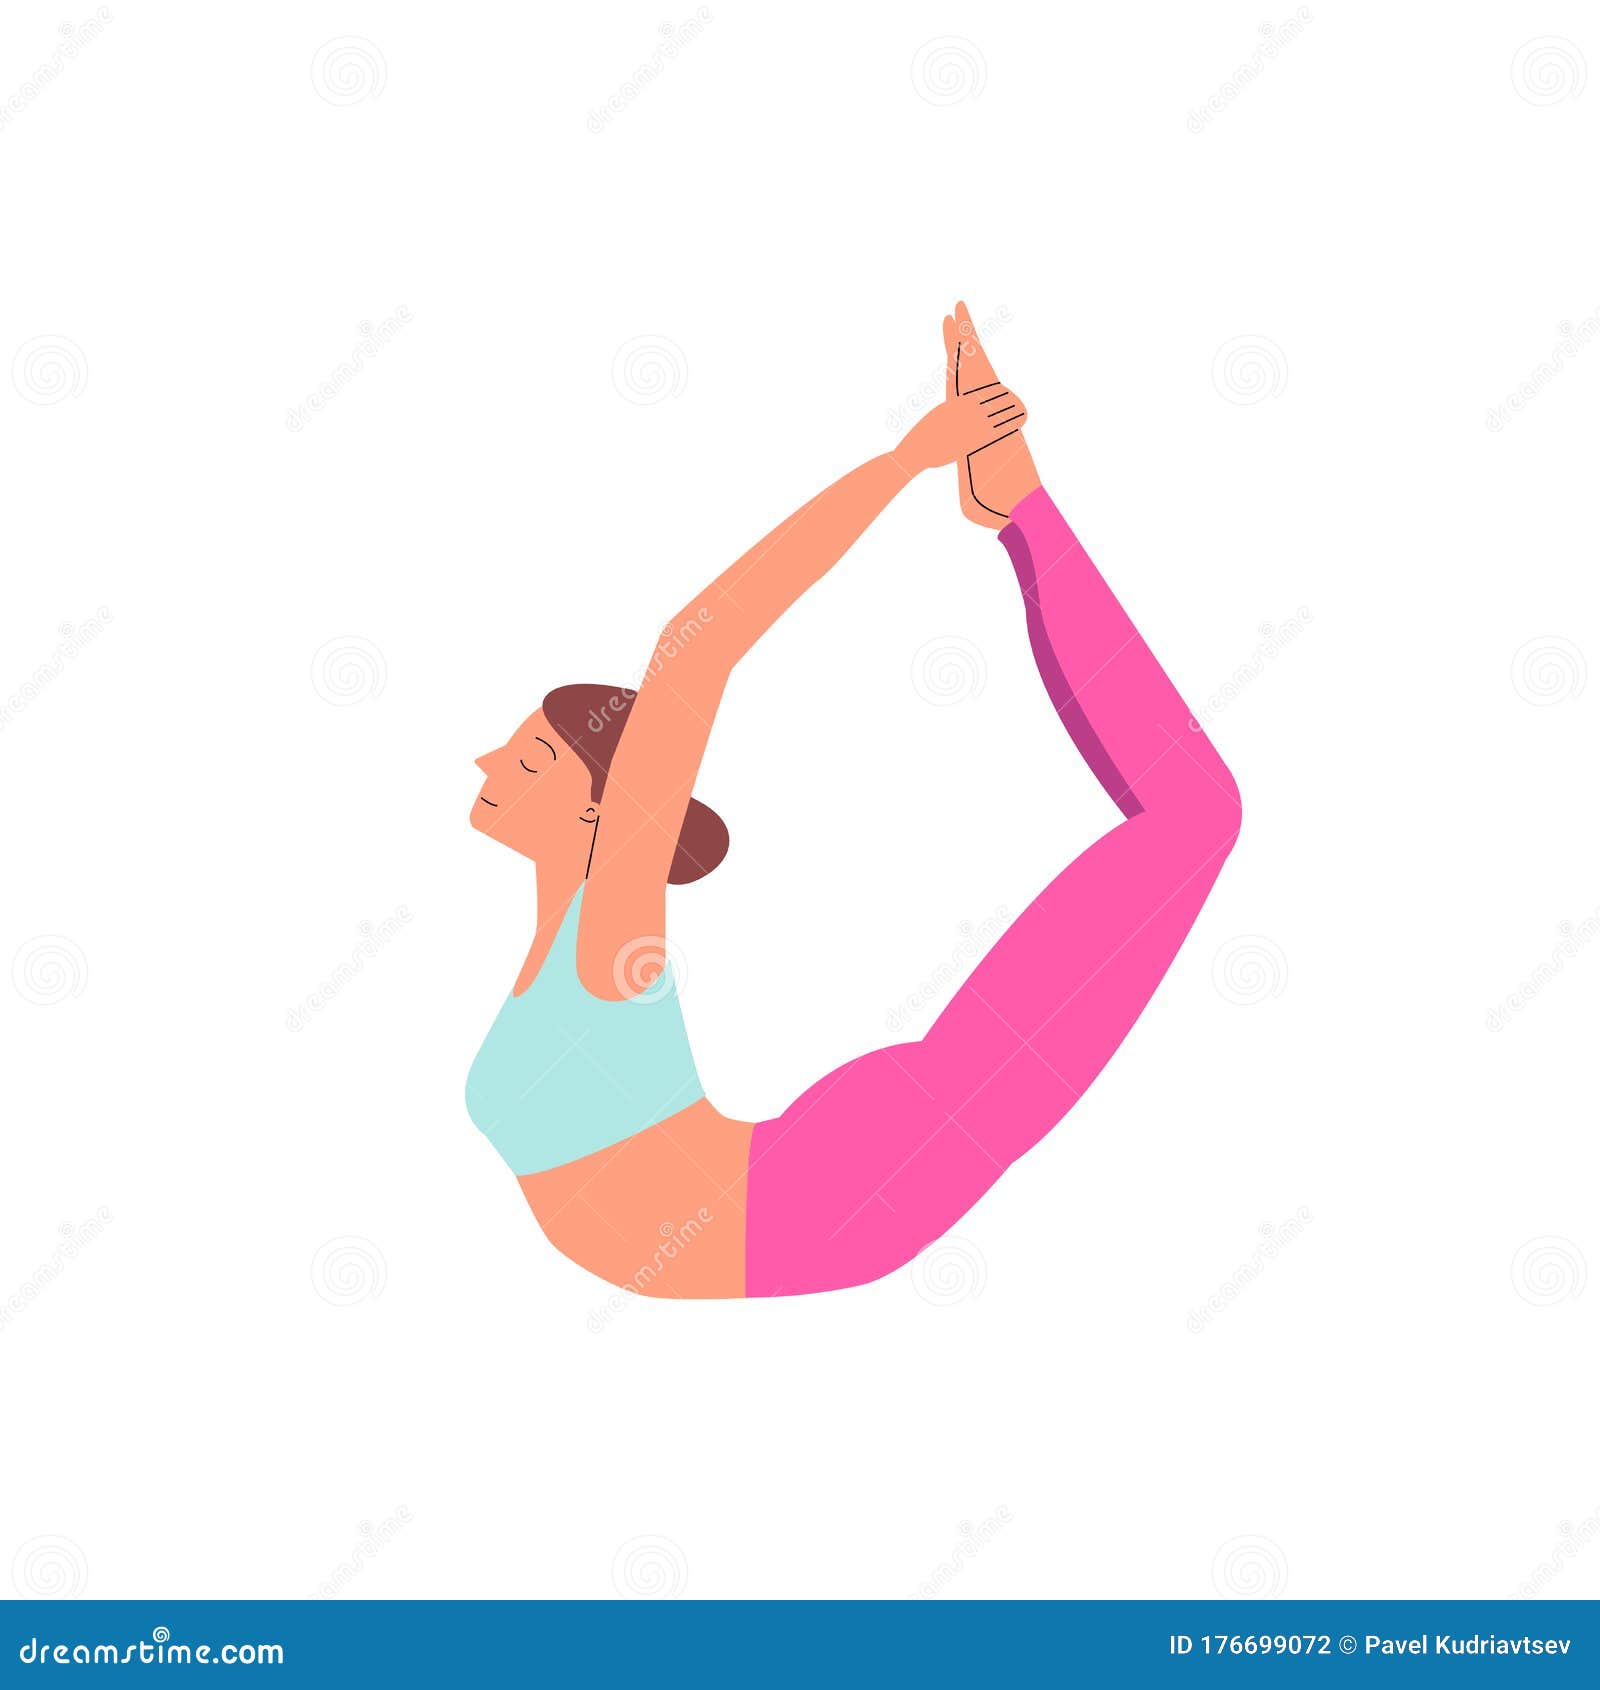 A Girl In Yoga Pose Vector Illustration On A White Background Isolated  Template Download on Pngtree